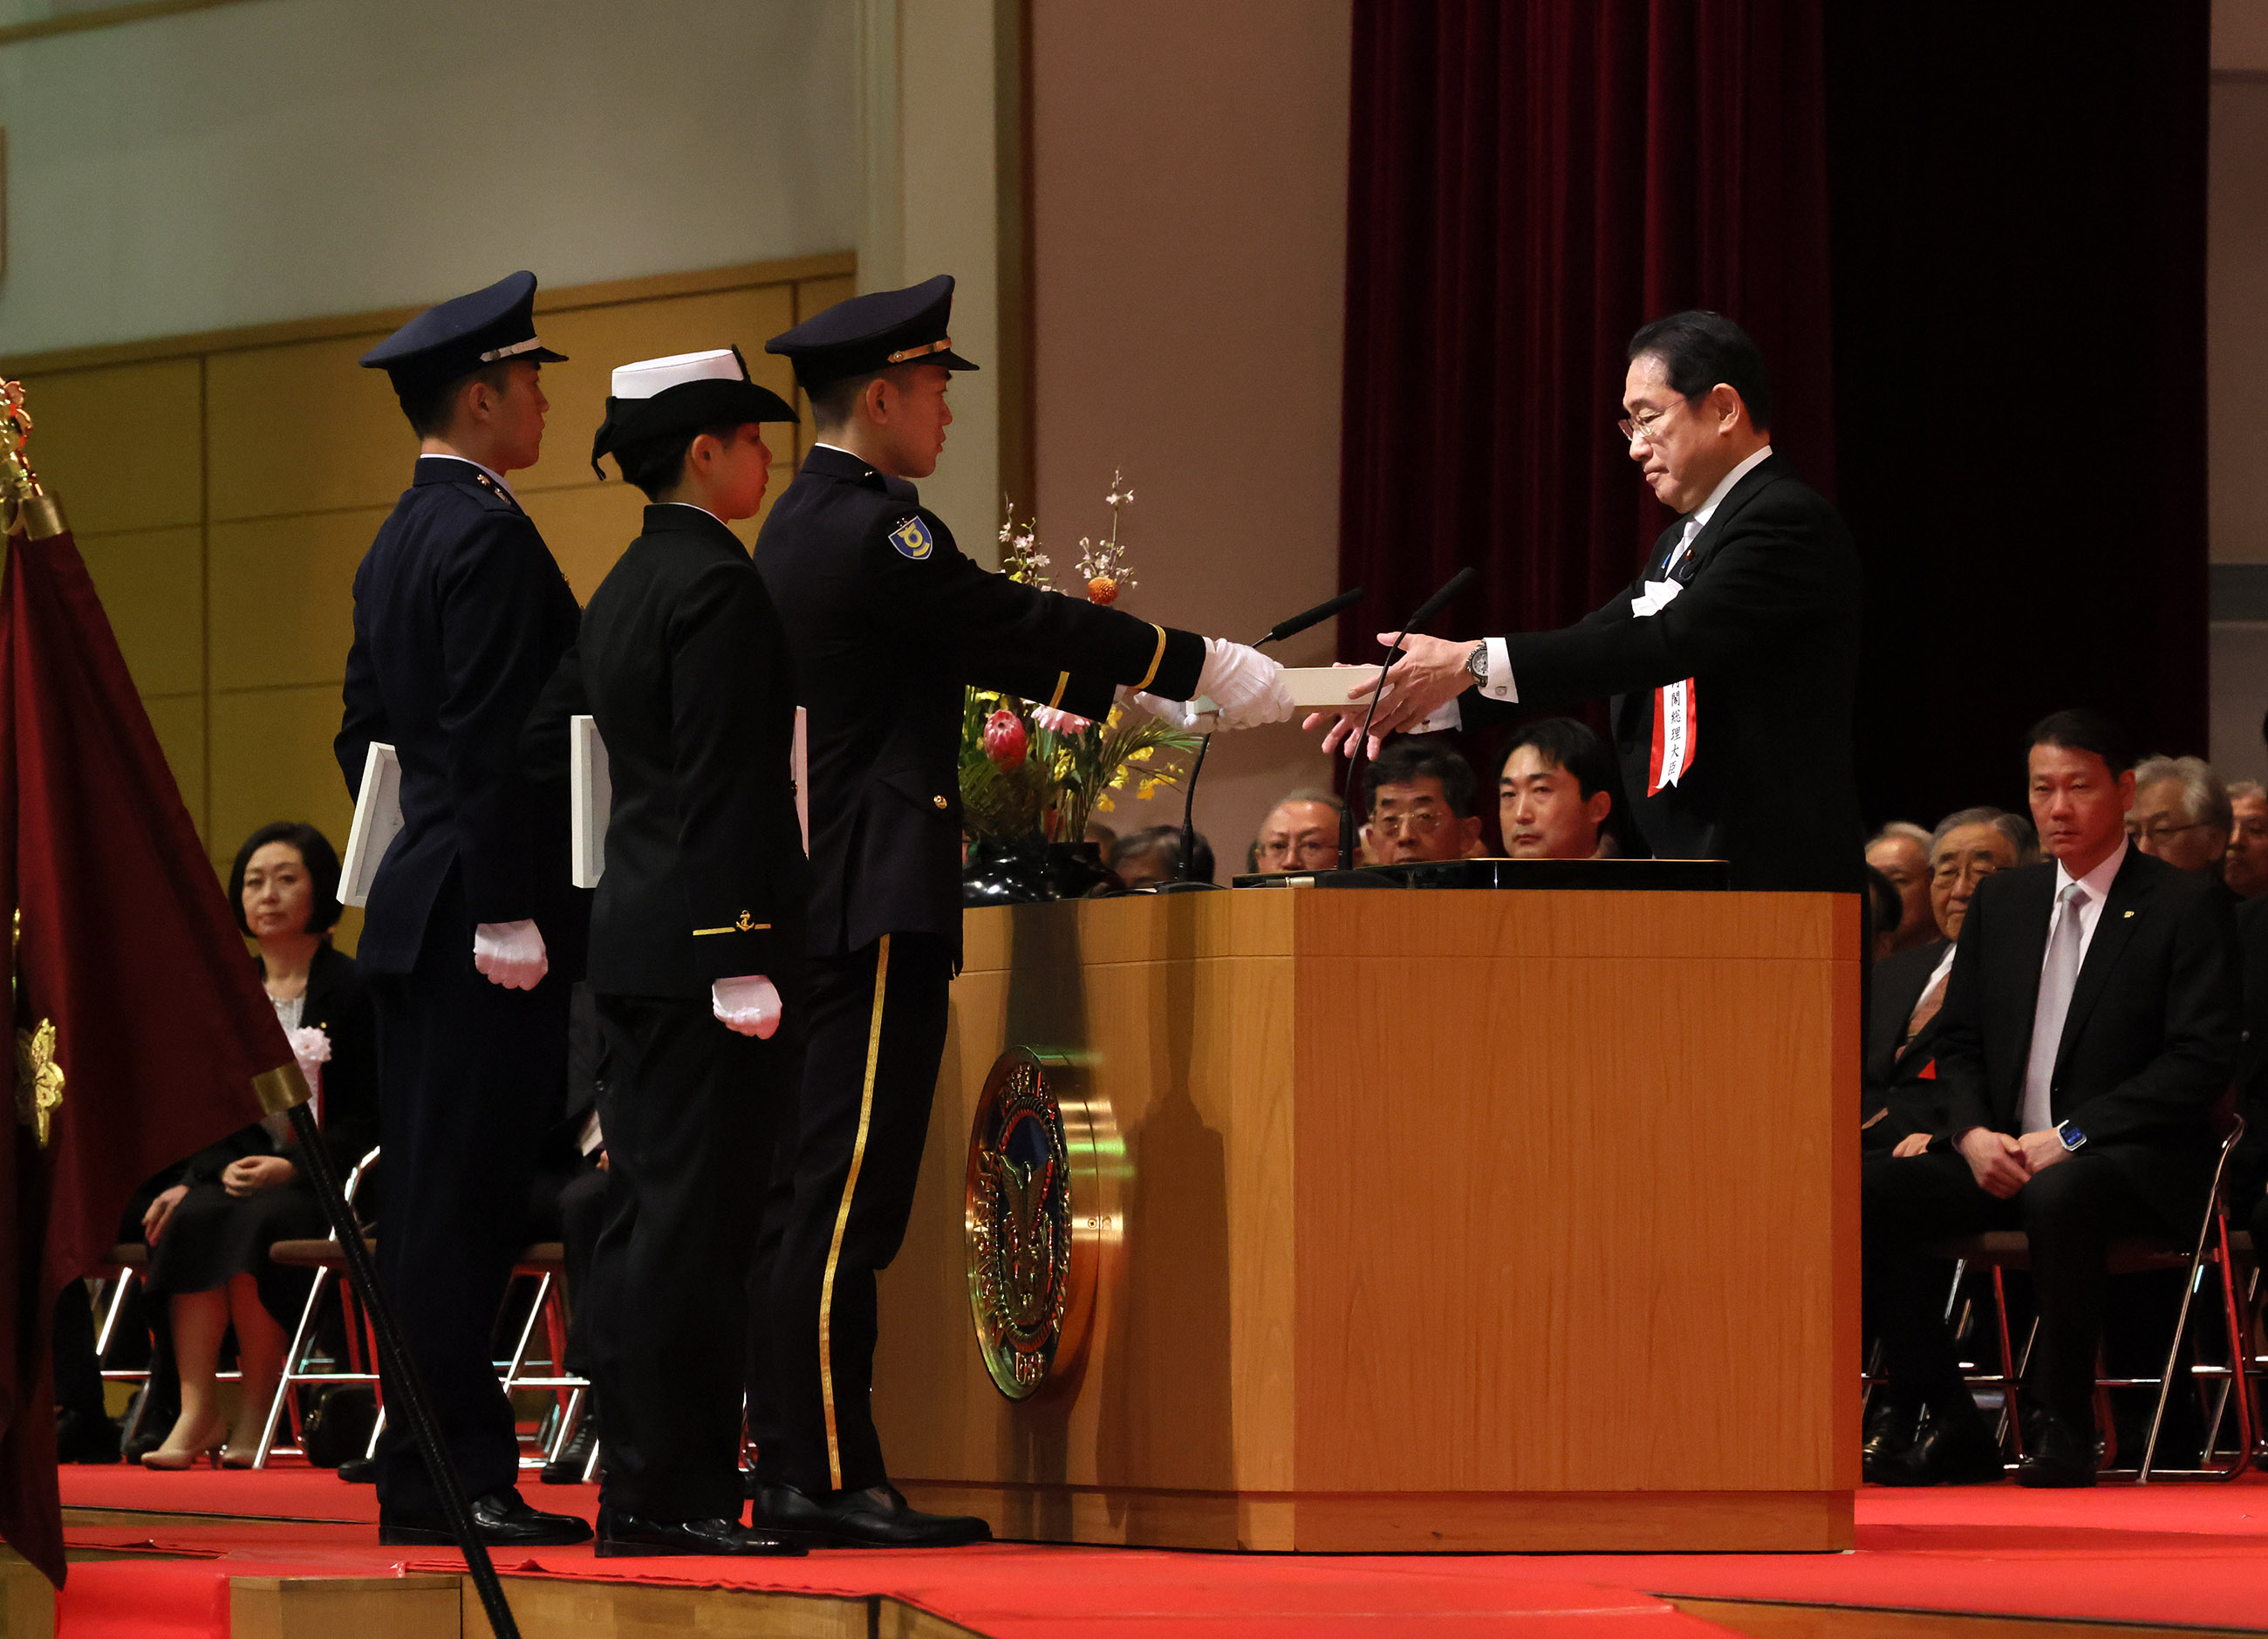 Prime Minister Kishida attending the assignment and oath of service ceremony (2)